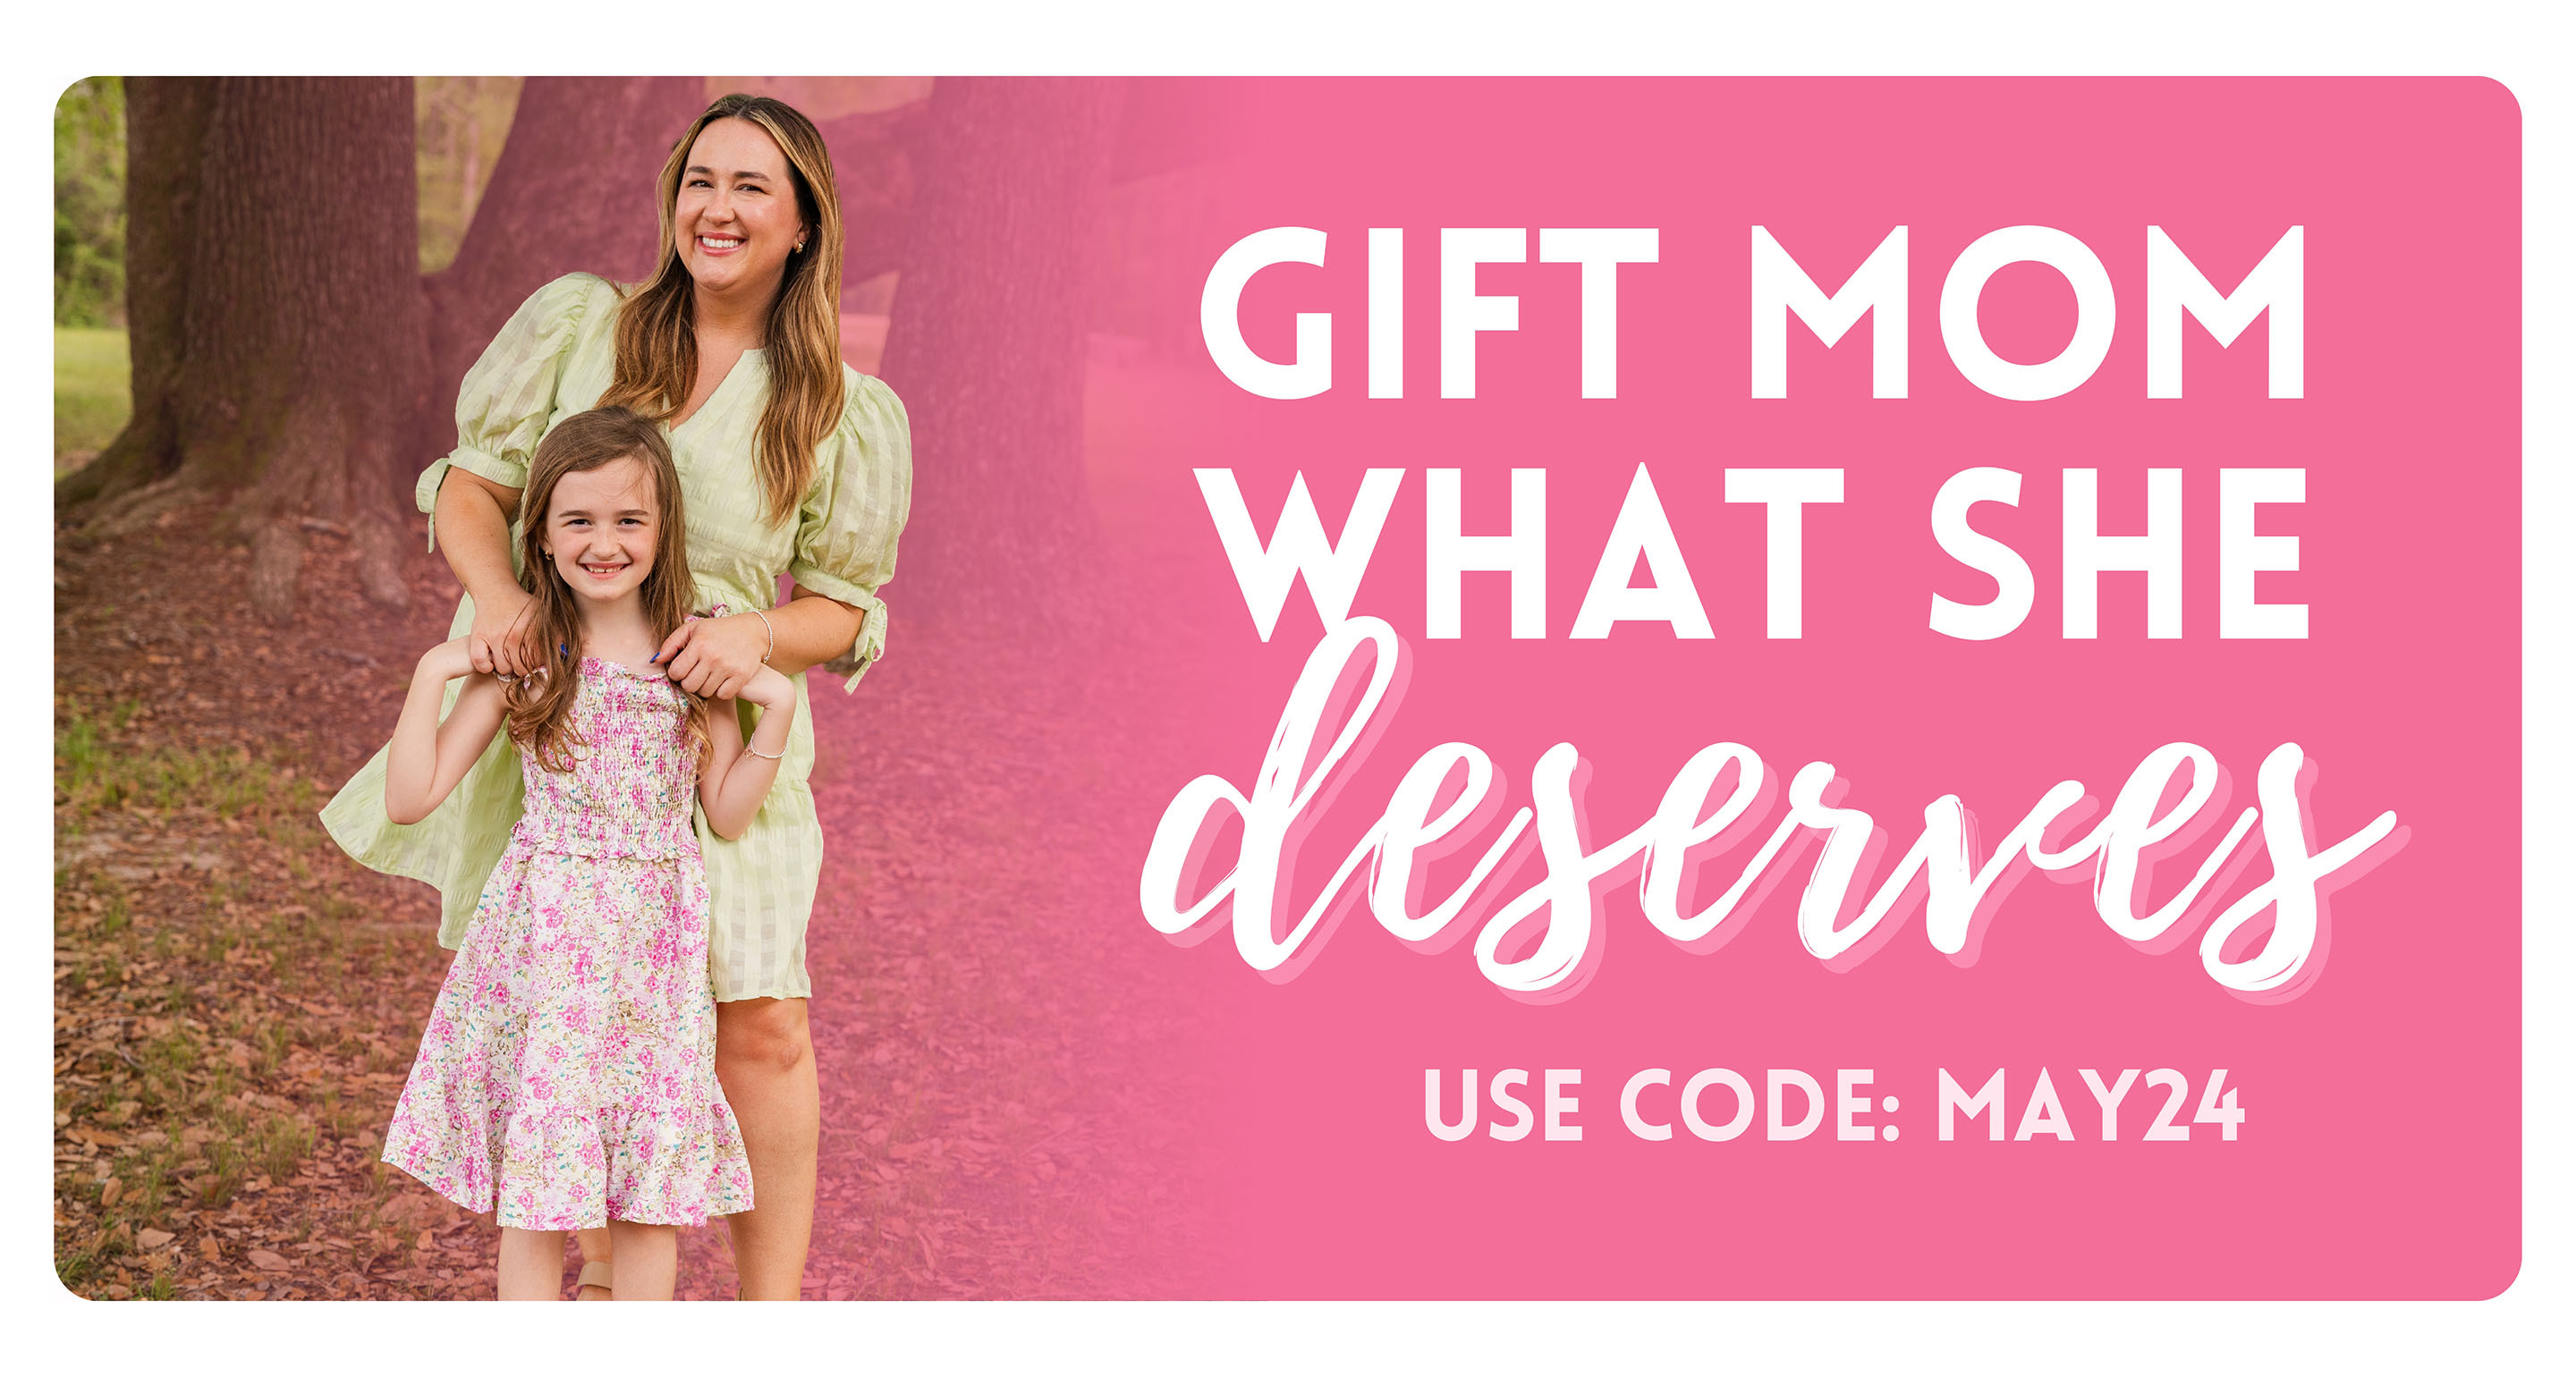 Gift Mom What She Deserves Use Code May24 to save up to $50 off.